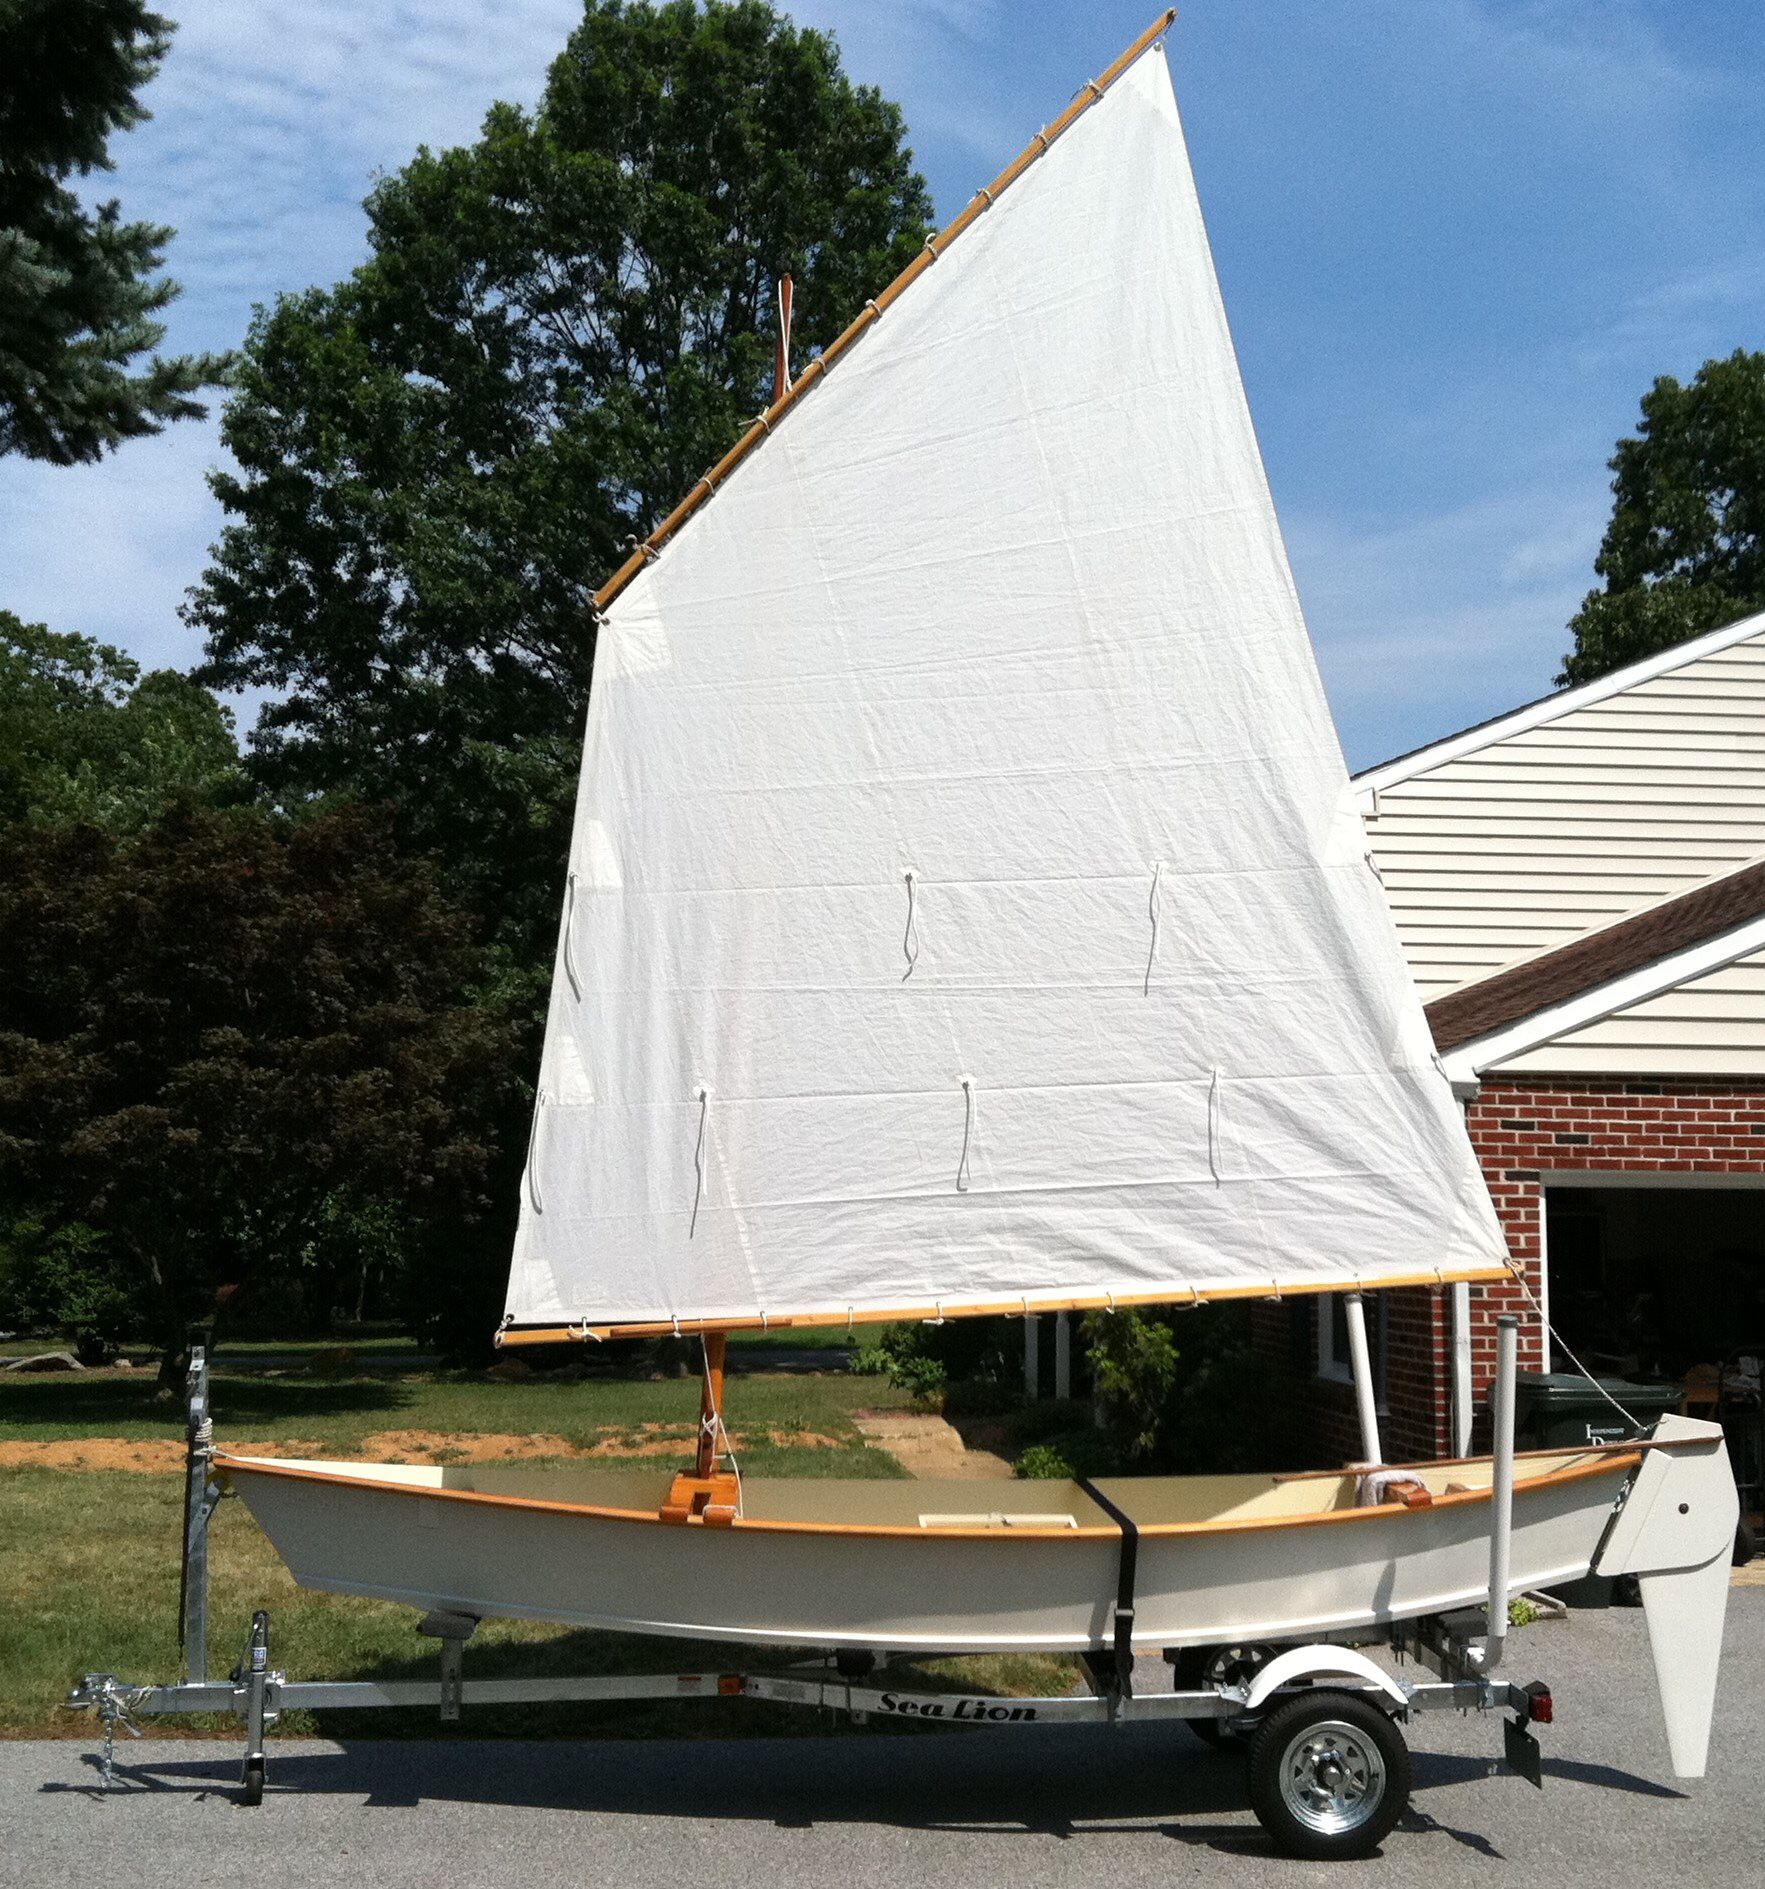 16' Wooden Sailboat (boat) and Galvanized Trailer